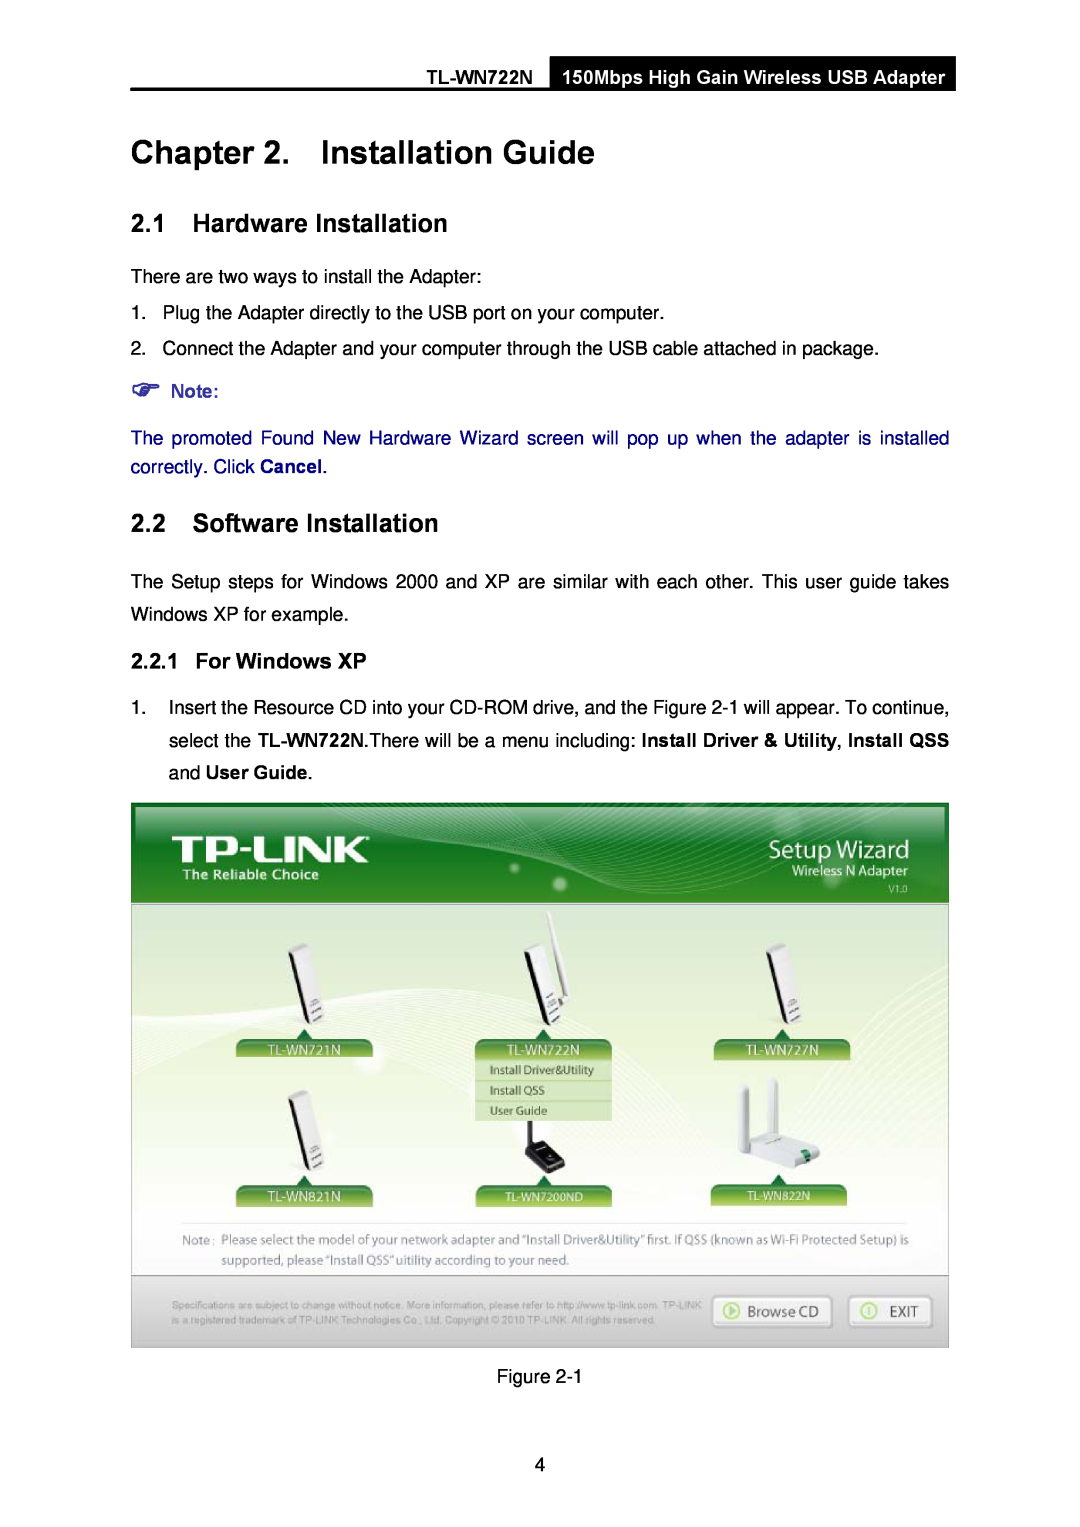 TP-Link TL-WN722N manual Installation Guide, Hardware Installation, Software Installation 